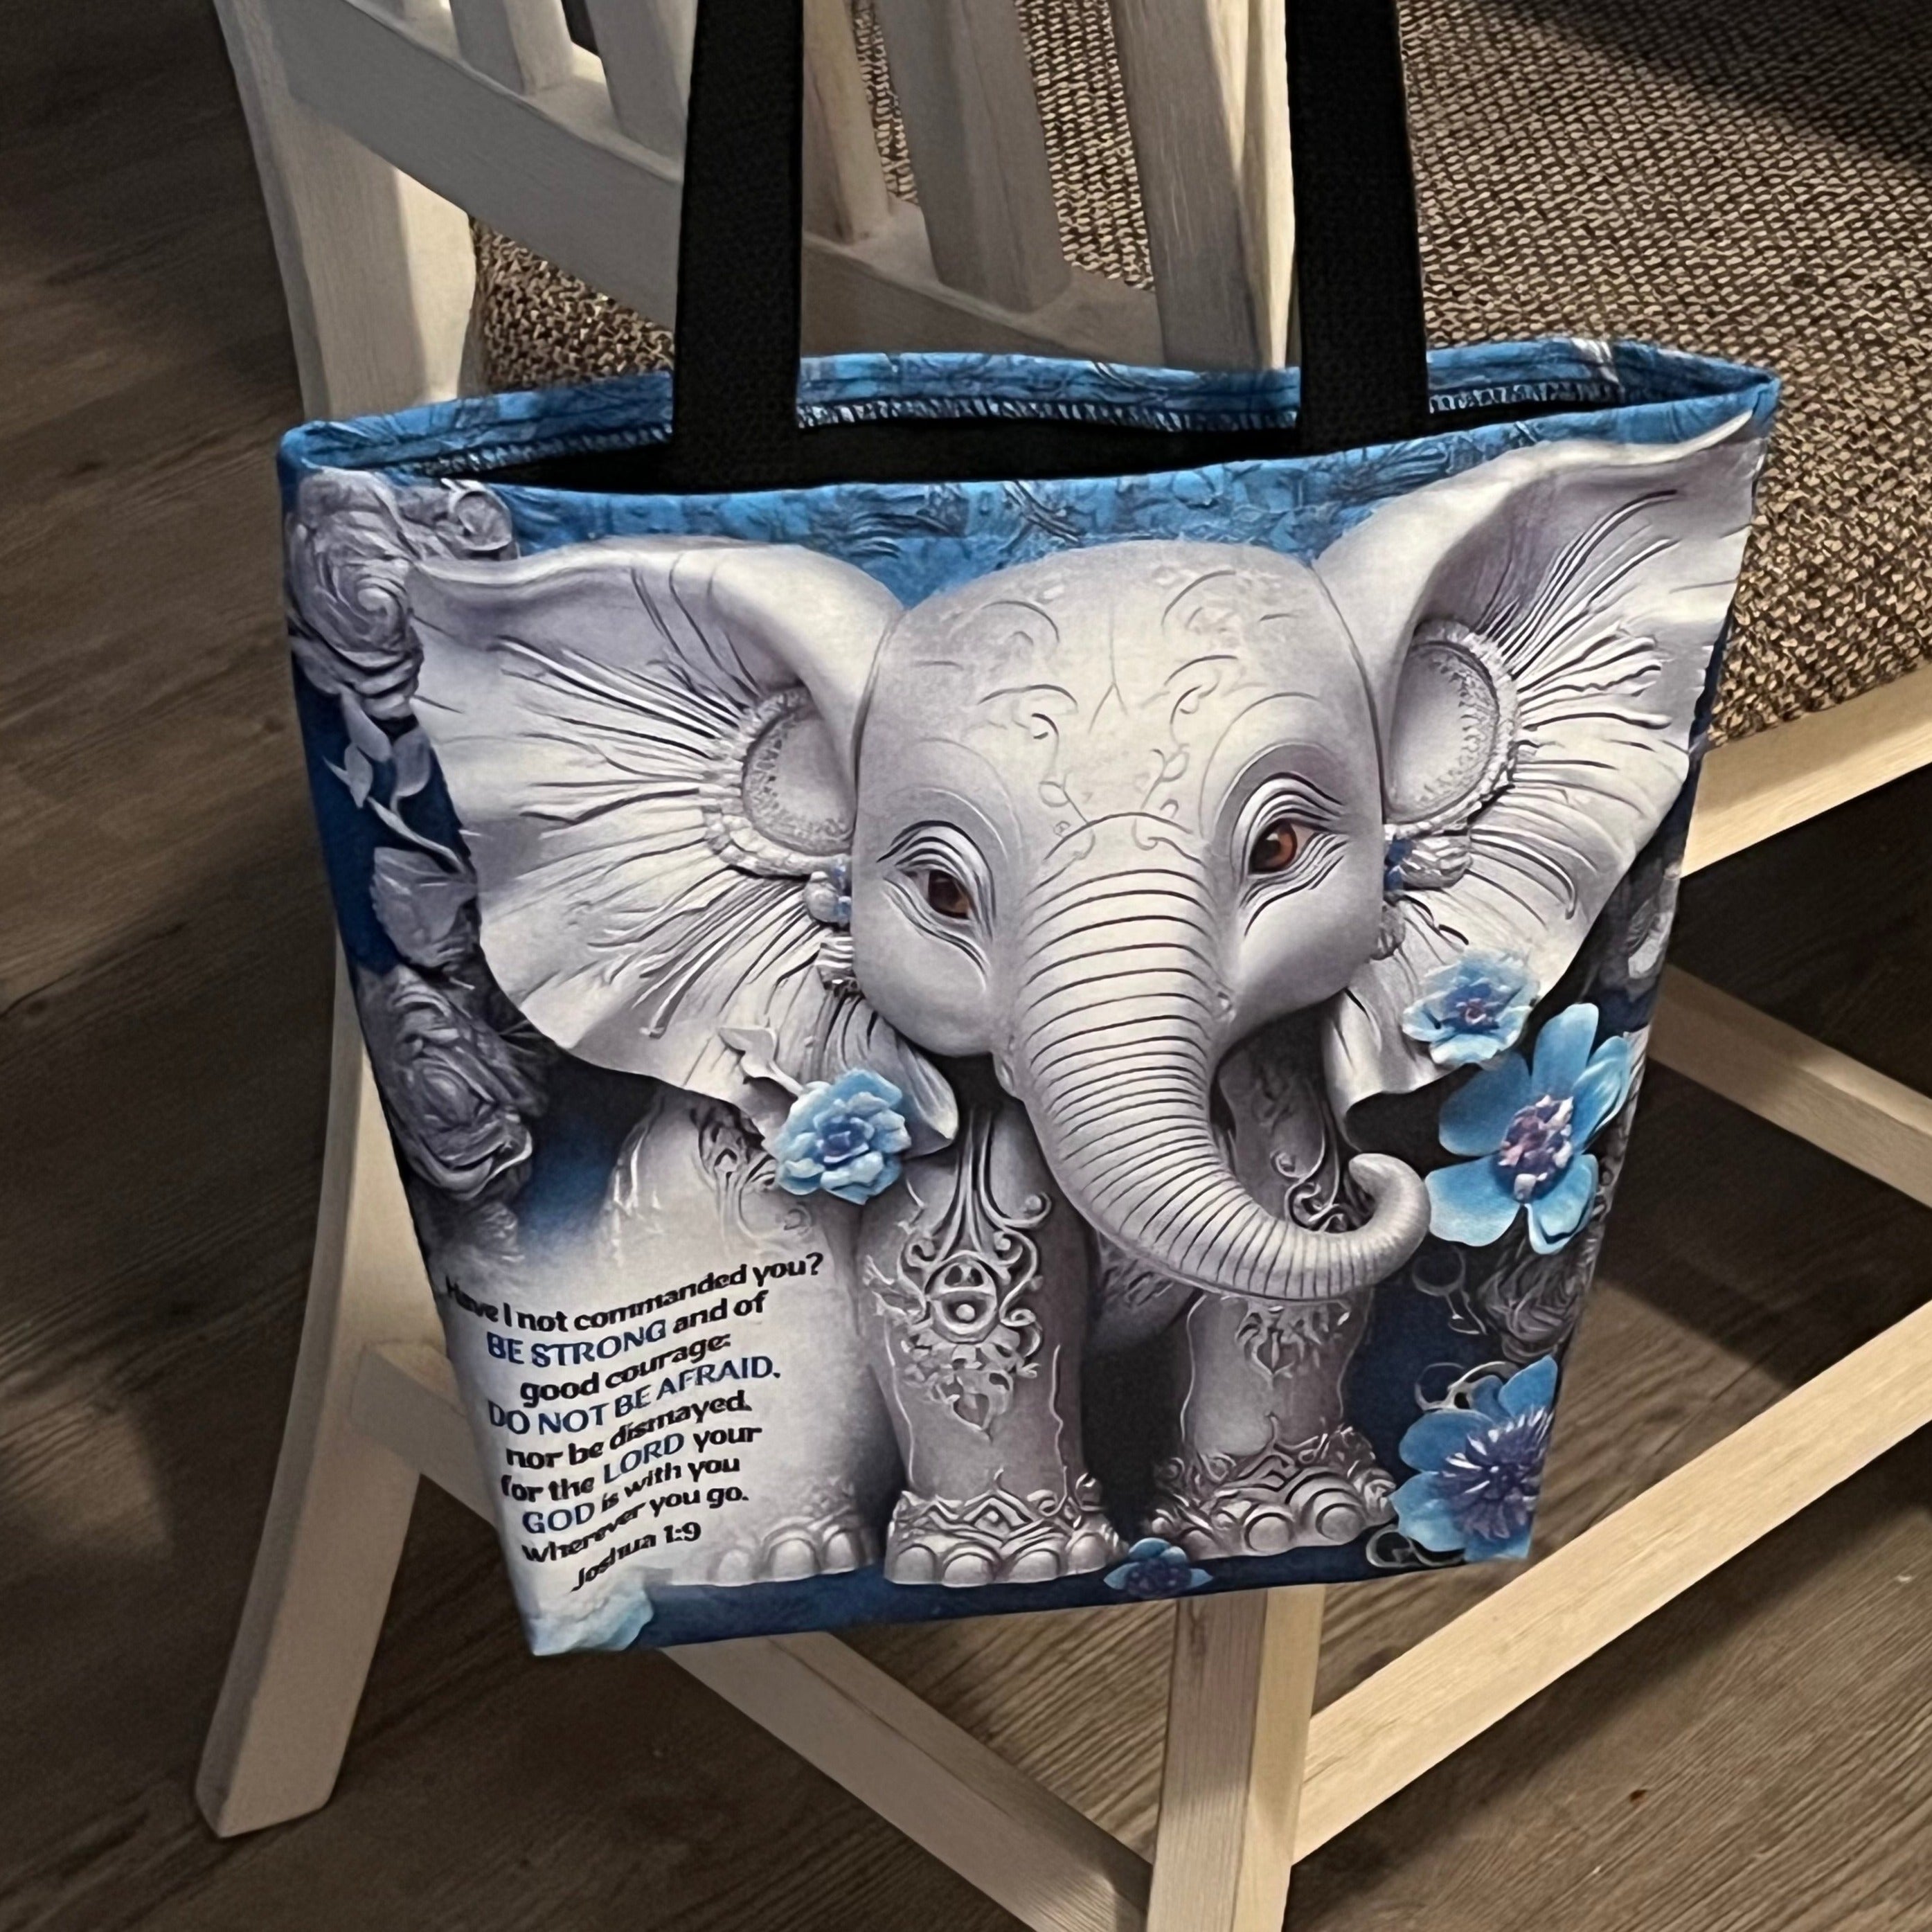 Bible Verse Tote Bag 3D Elephant Image Christian Bible Scripture Strong and Courageous Quote Inspirational Faith Bible Bag Shoulder Tote